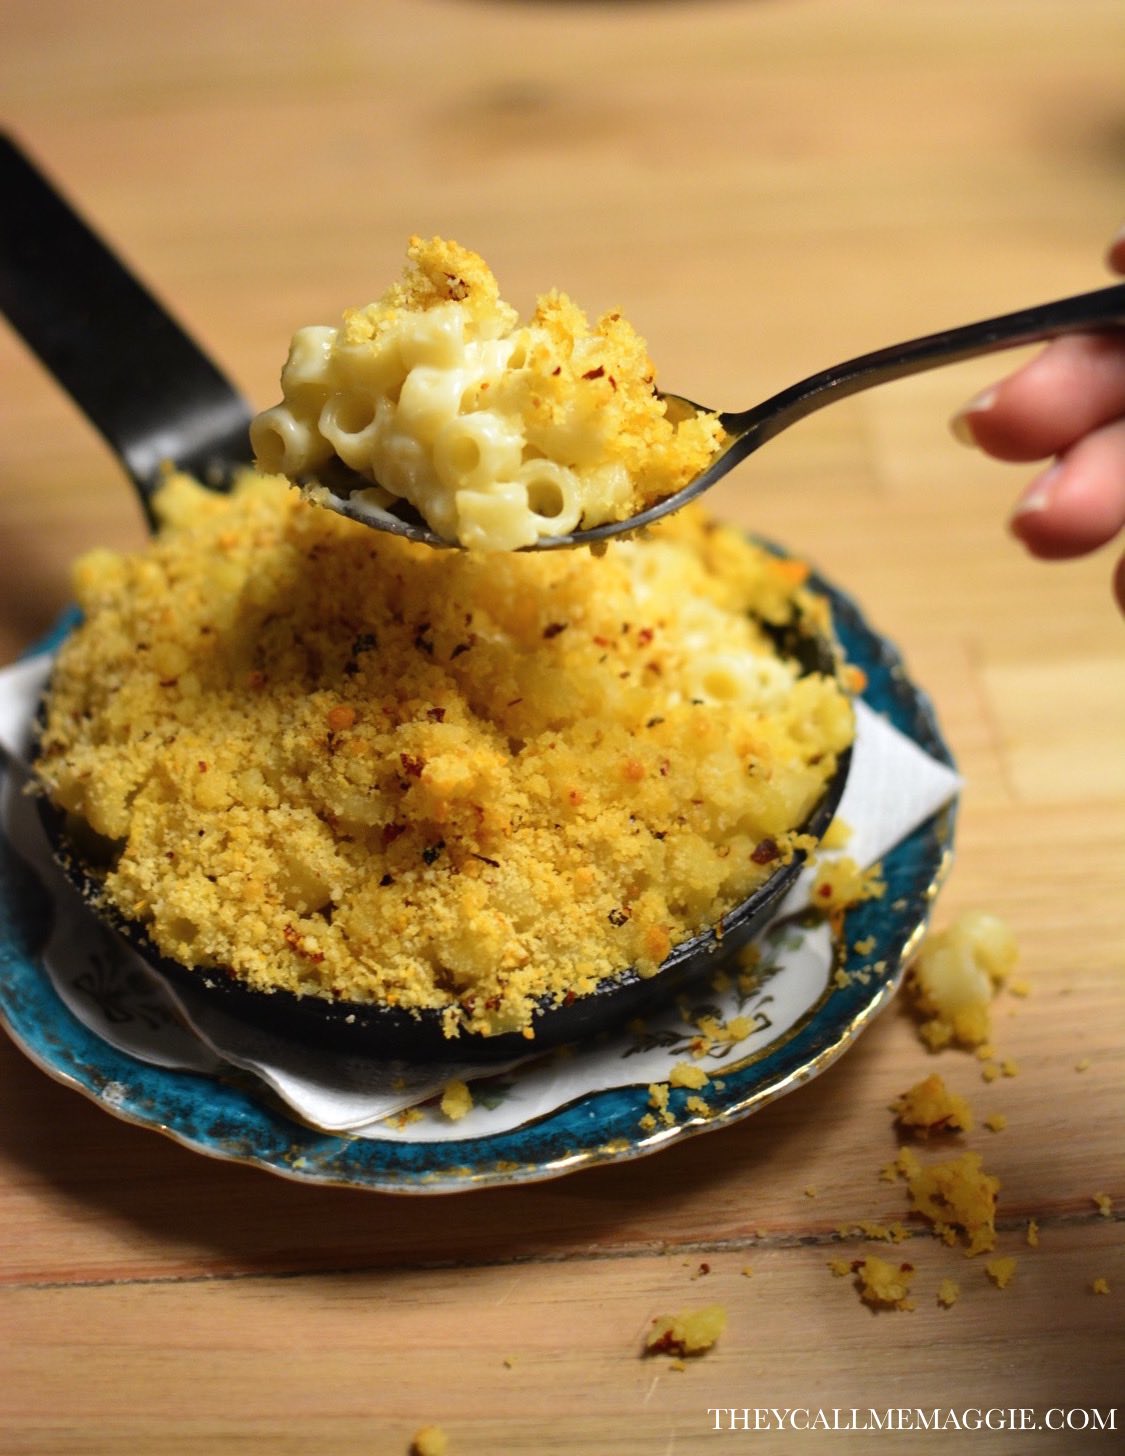  Mac and cheese 